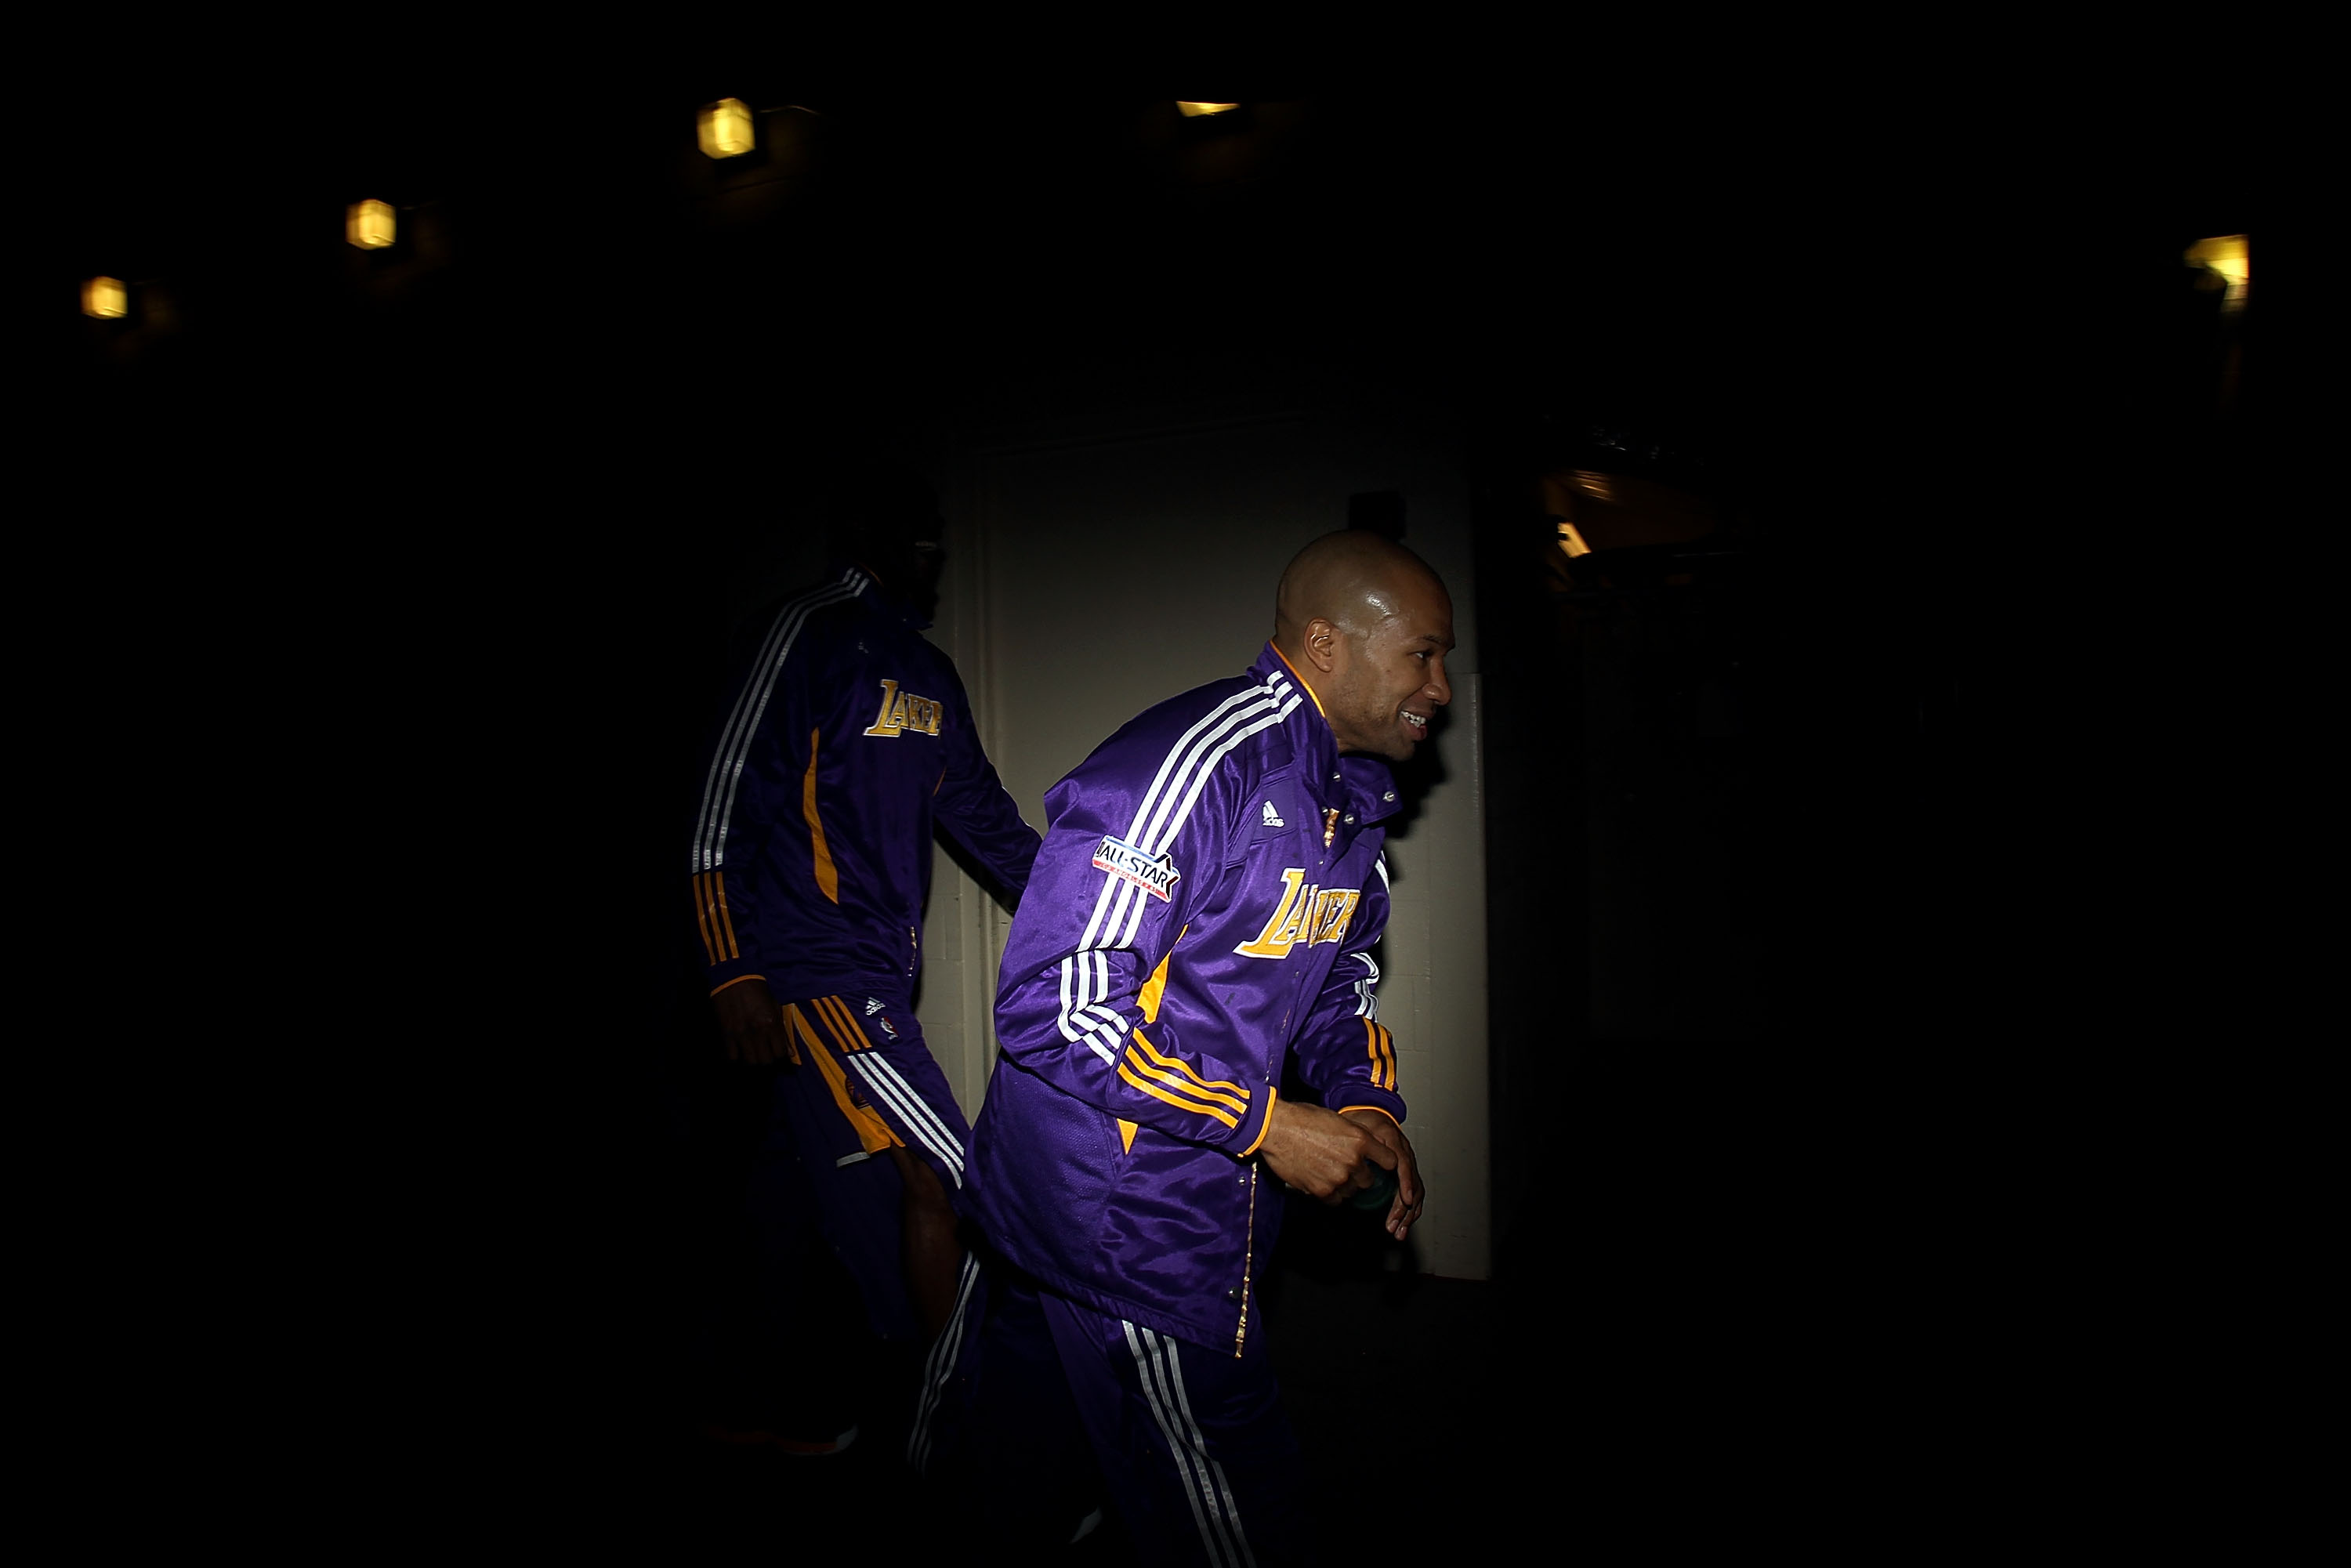 DALLAS, TX - JANUARY 19:  Guard Derek Fisher #2 of the Los Angeles Lakers runs to the court before a game against the Dallas Mavericks at American Airlines Center on January 19, 2011 in Dallas, Texas.  NOTE TO USER: User expressly acknowledges and agrees